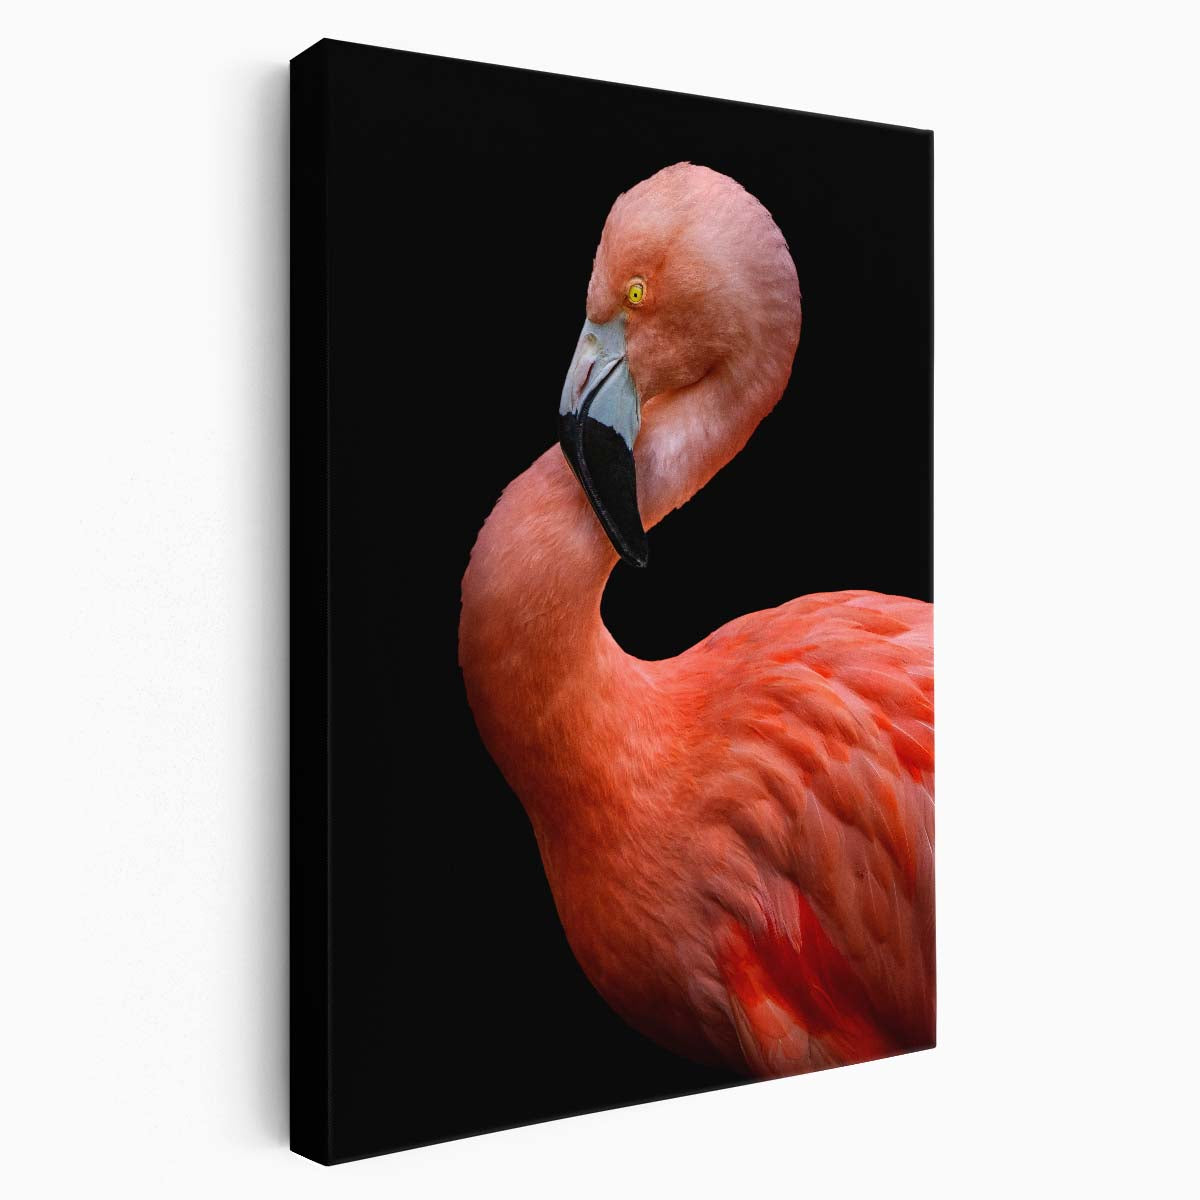 Hardik Pandya's Pink Flamingo Portrait, Colorful Feathered Animal Photography by Luxuriance Designs, made in USA